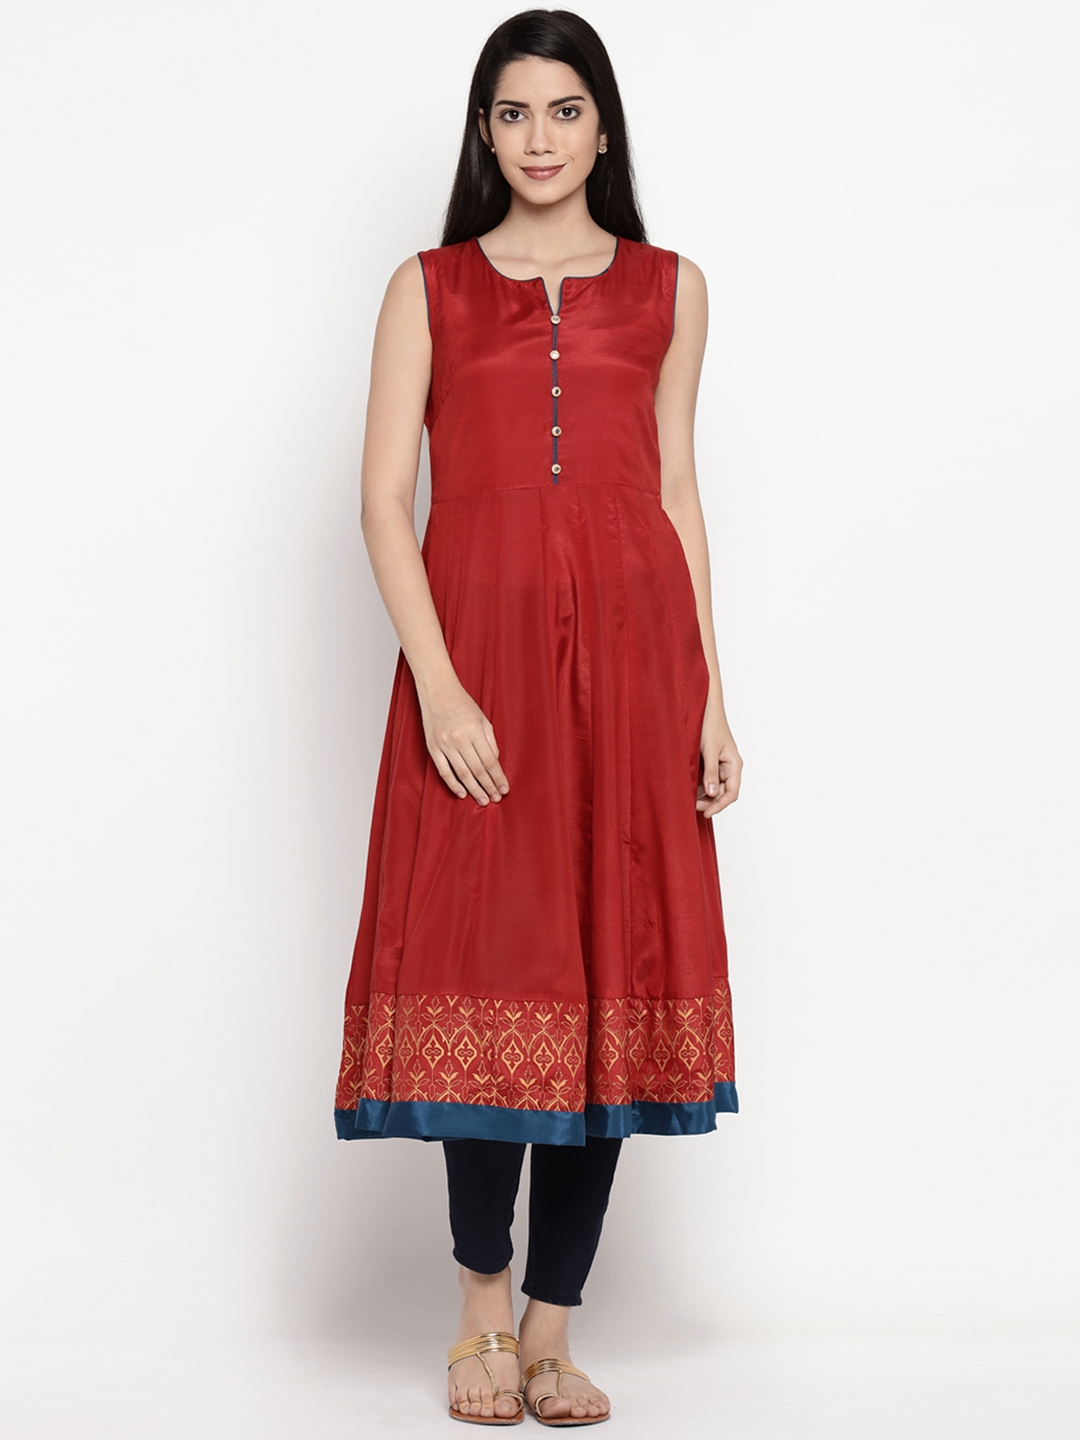 RANGMANCH BY PANTALOONS Burgundy Floral Embroidered Ethnic Midi Dress   Absolutely Desi